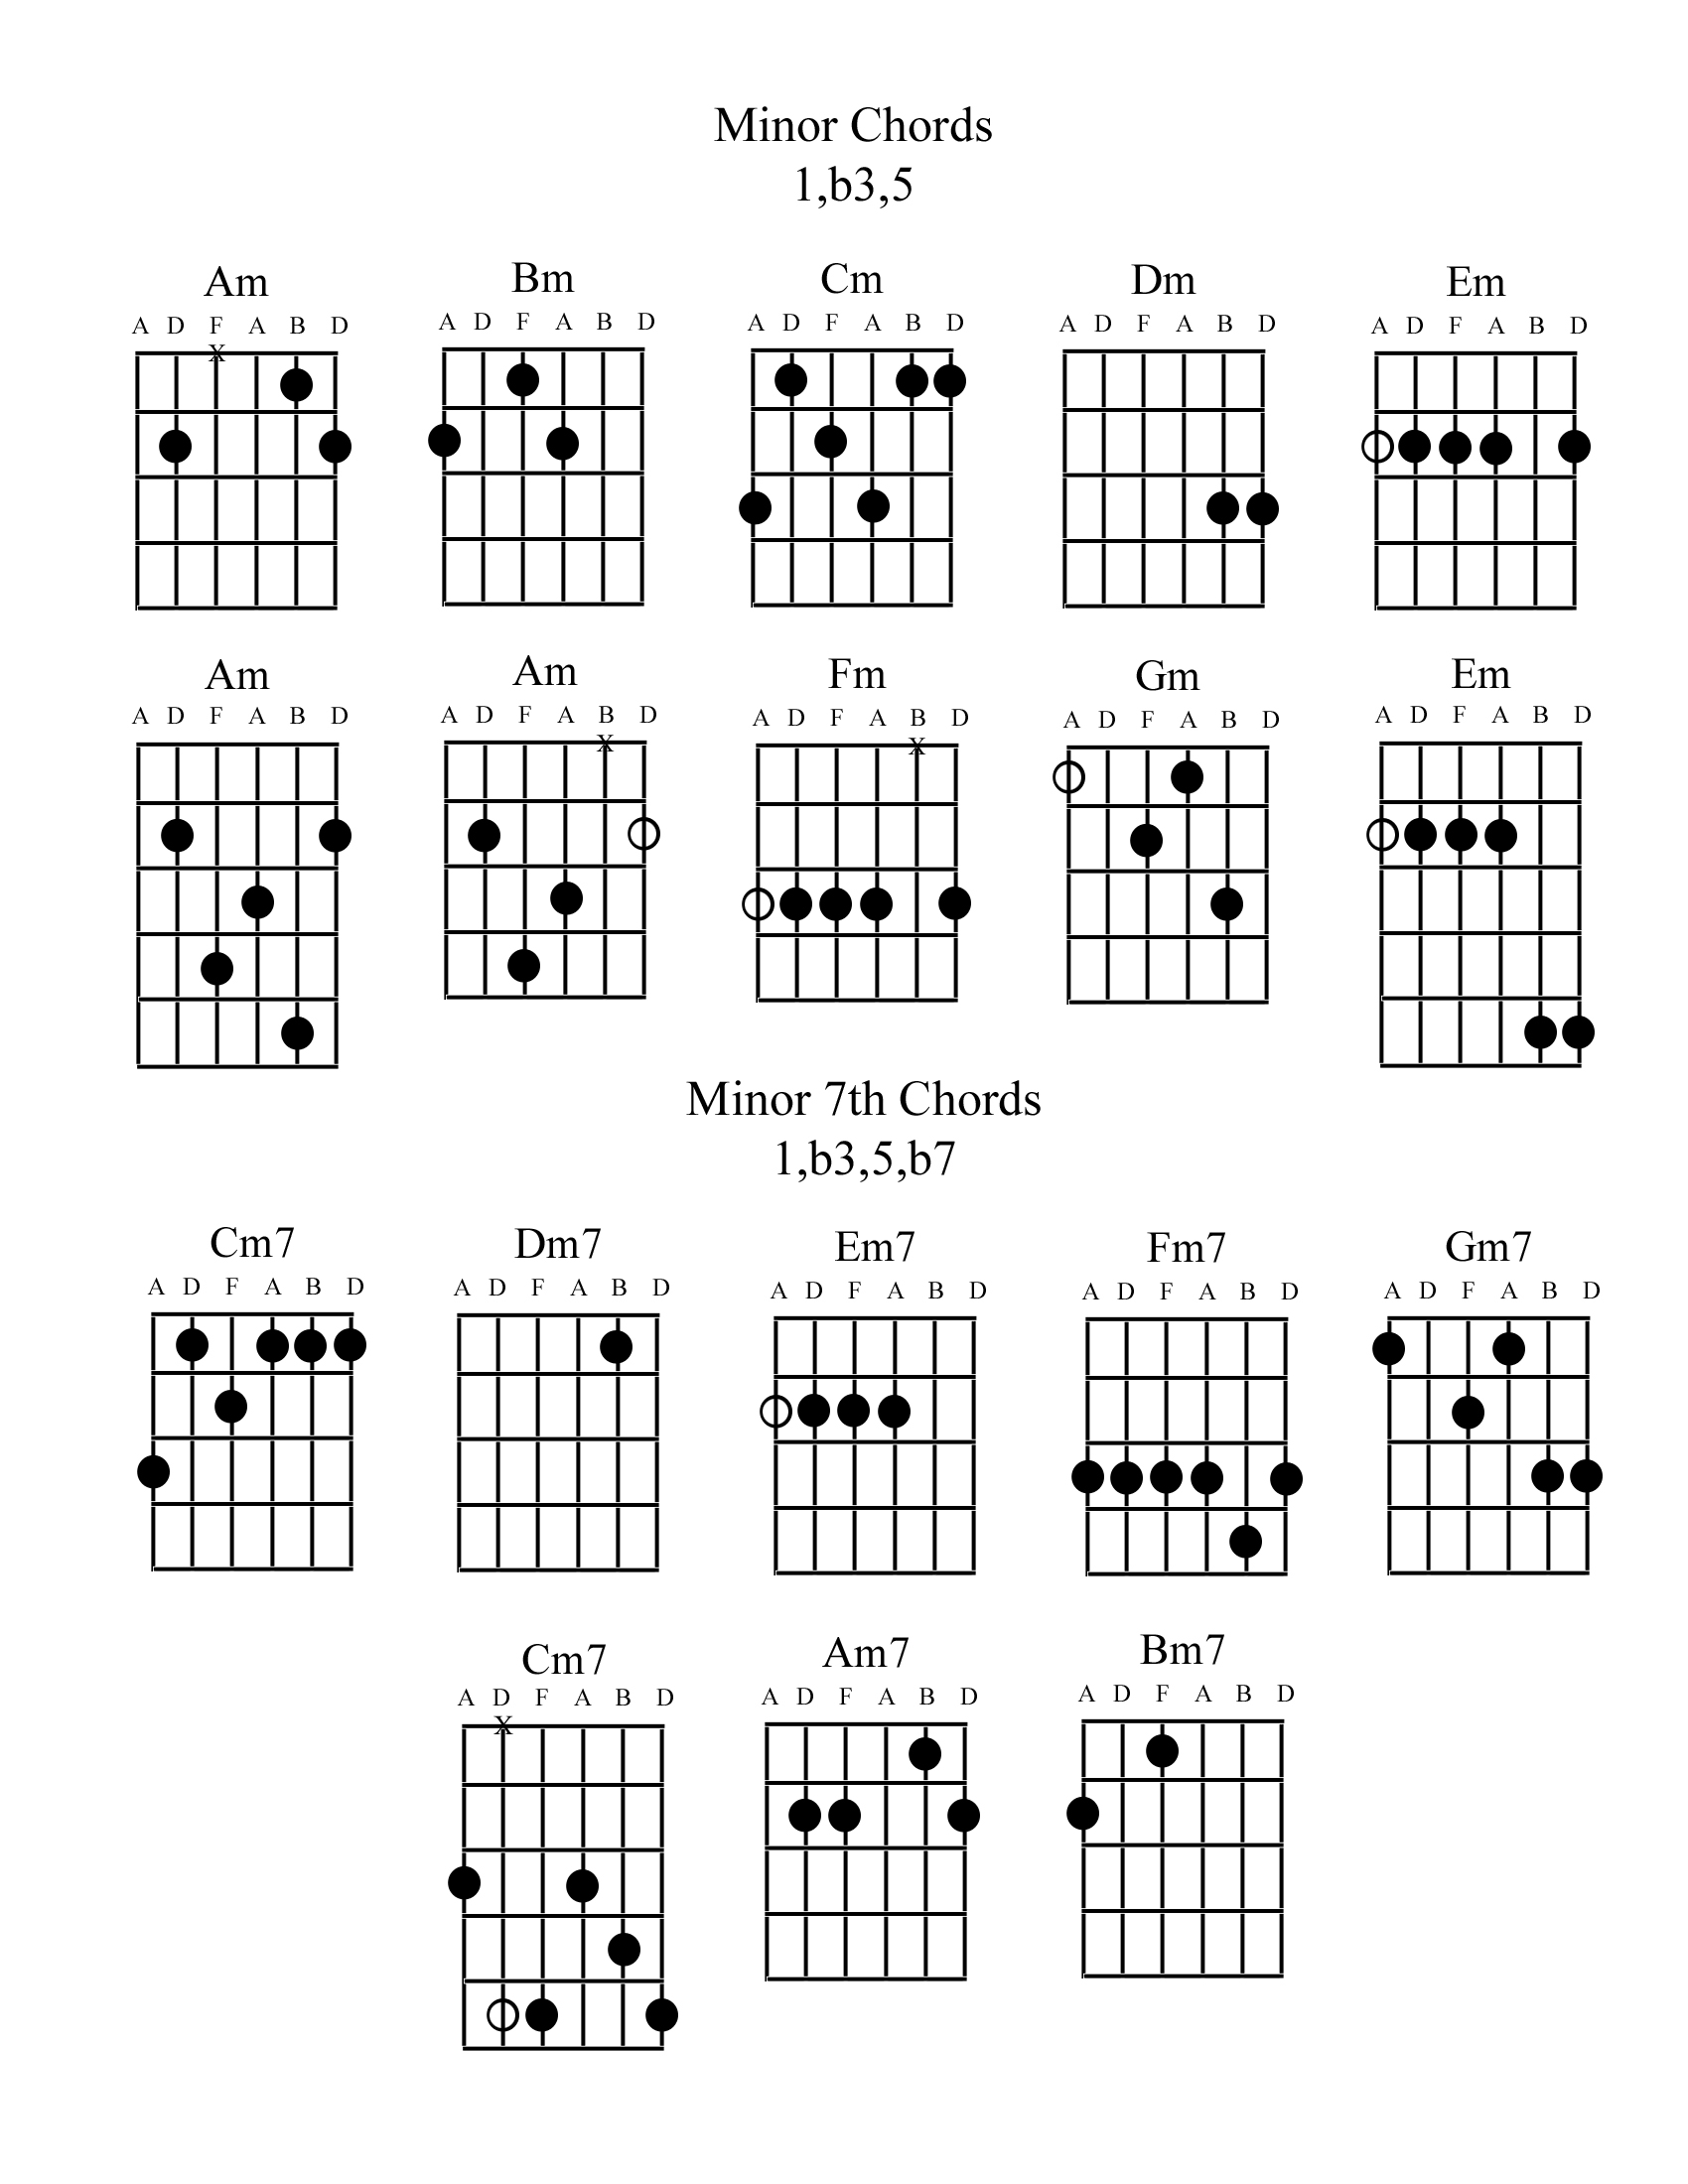 Major 7th Chord Guitar Arpeggio Chart Scale Based Patterns.